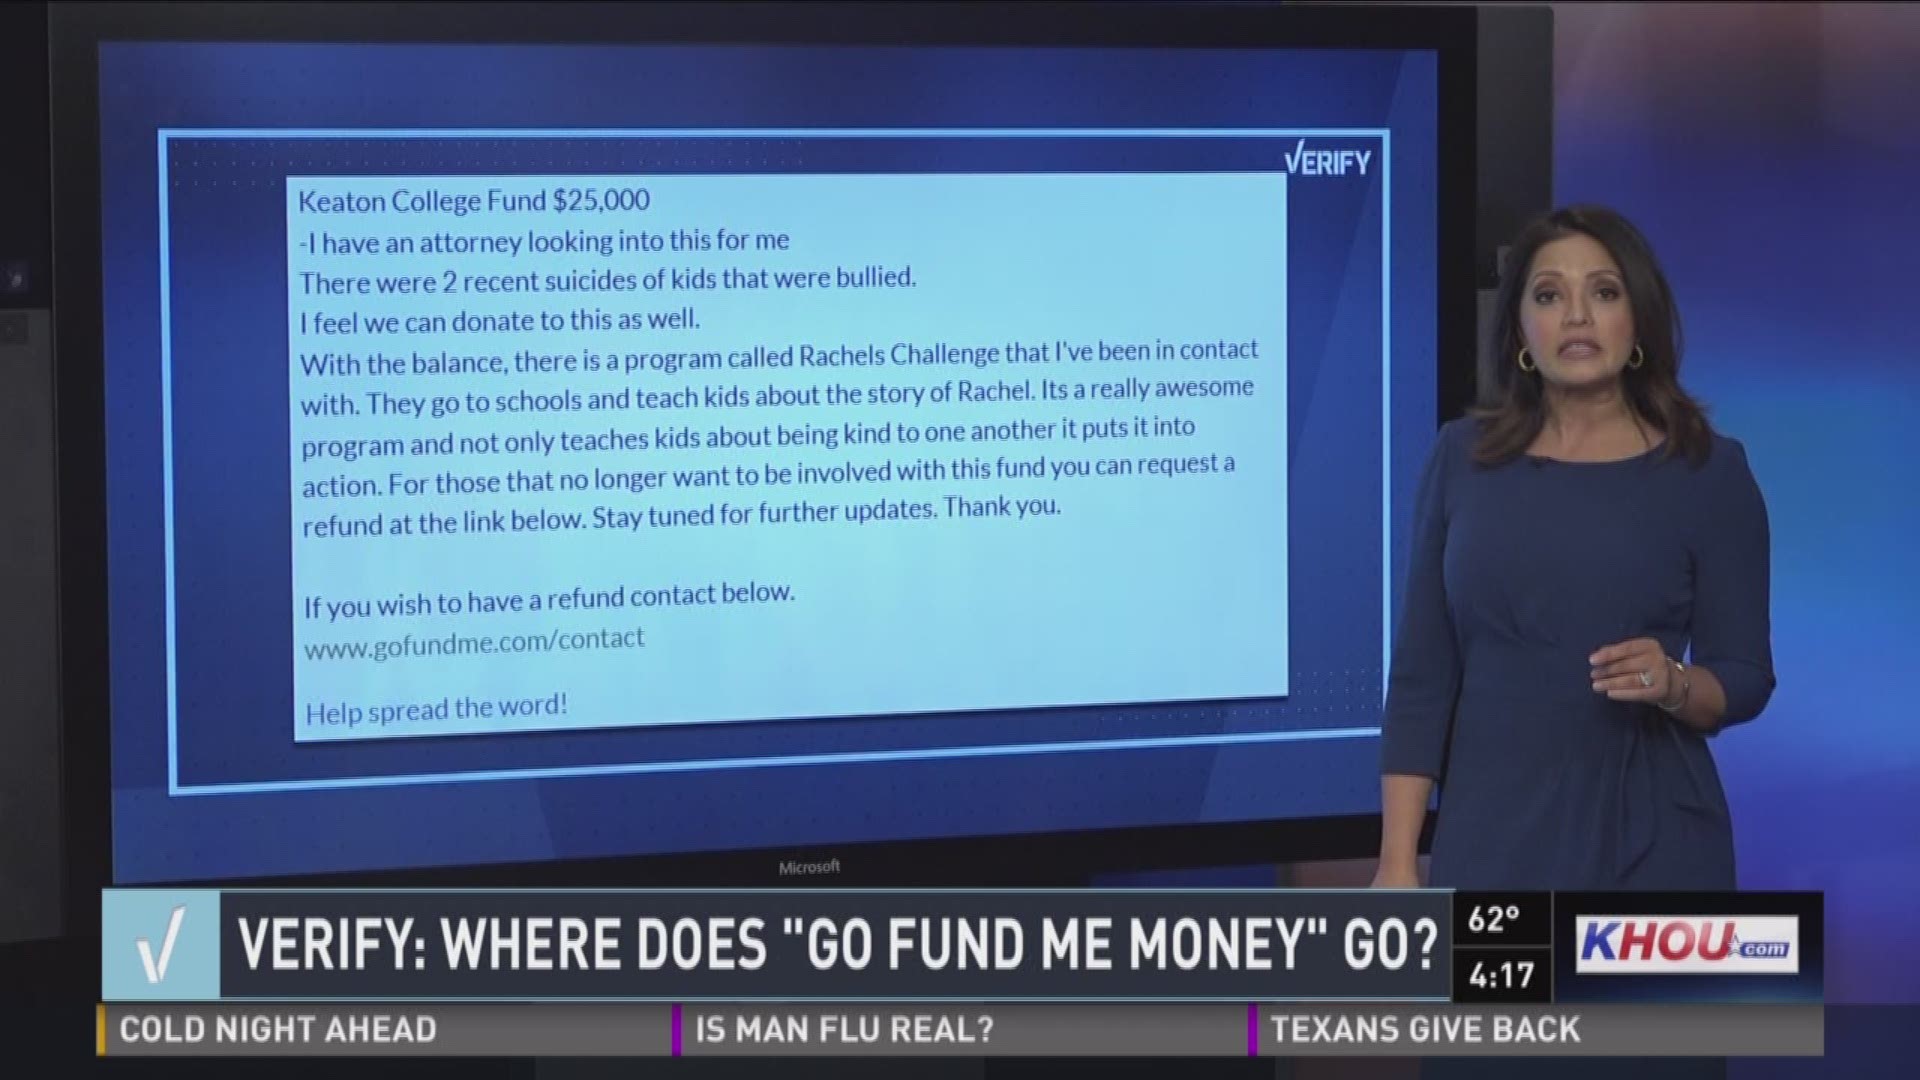 Our Verify team got answers on where GoFundMe money actually goes.